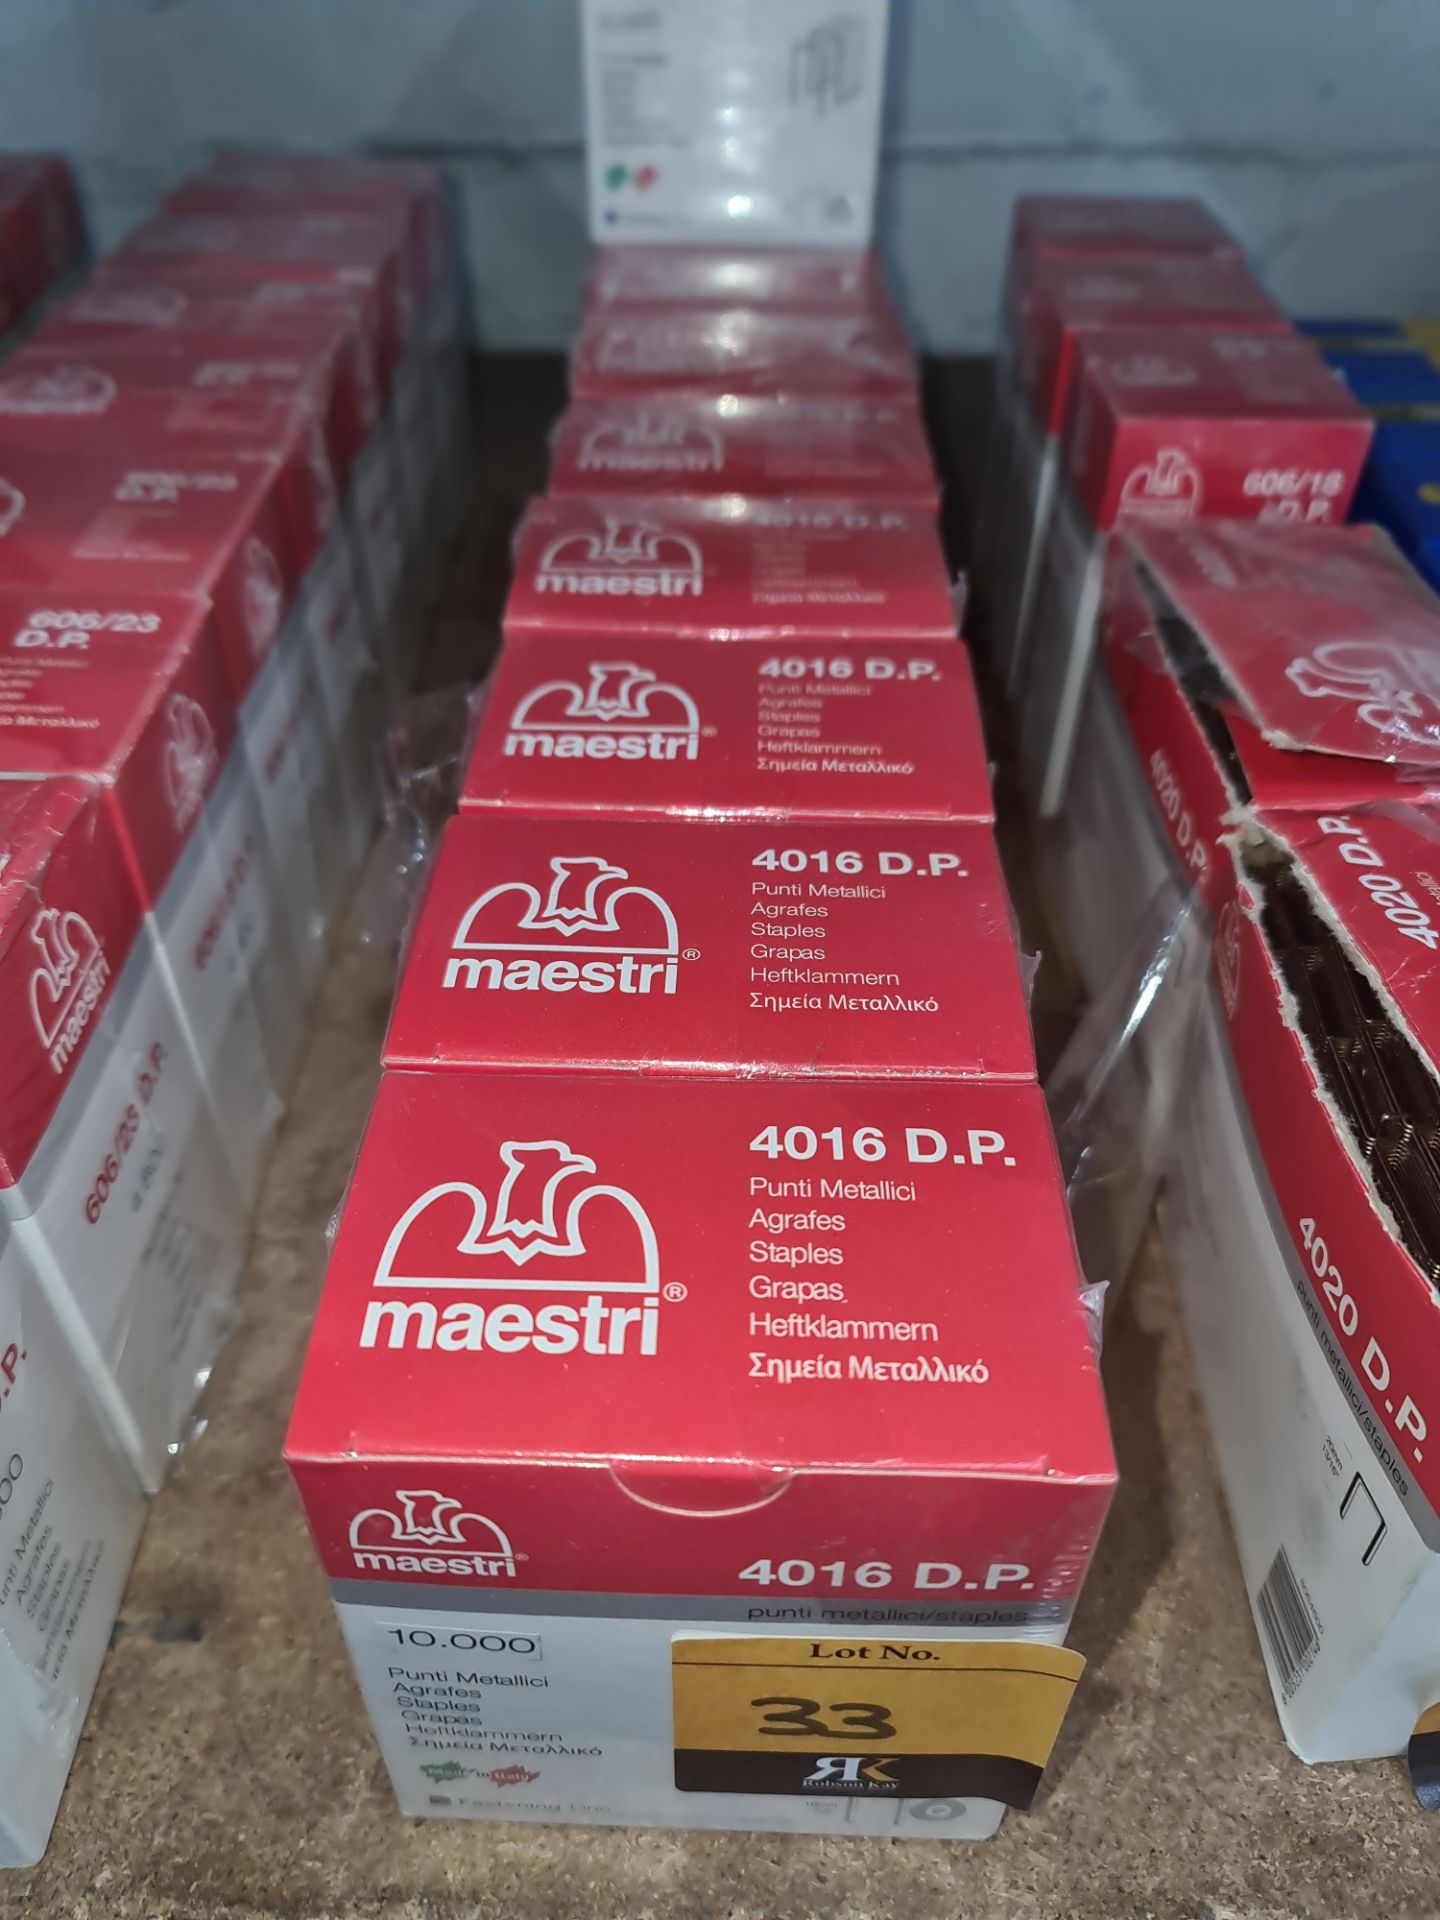 11 boxes of Maestri 4016 DP staples, each box containing 10,000 staplesLots 31 - 328 comprise the - Image 2 of 3